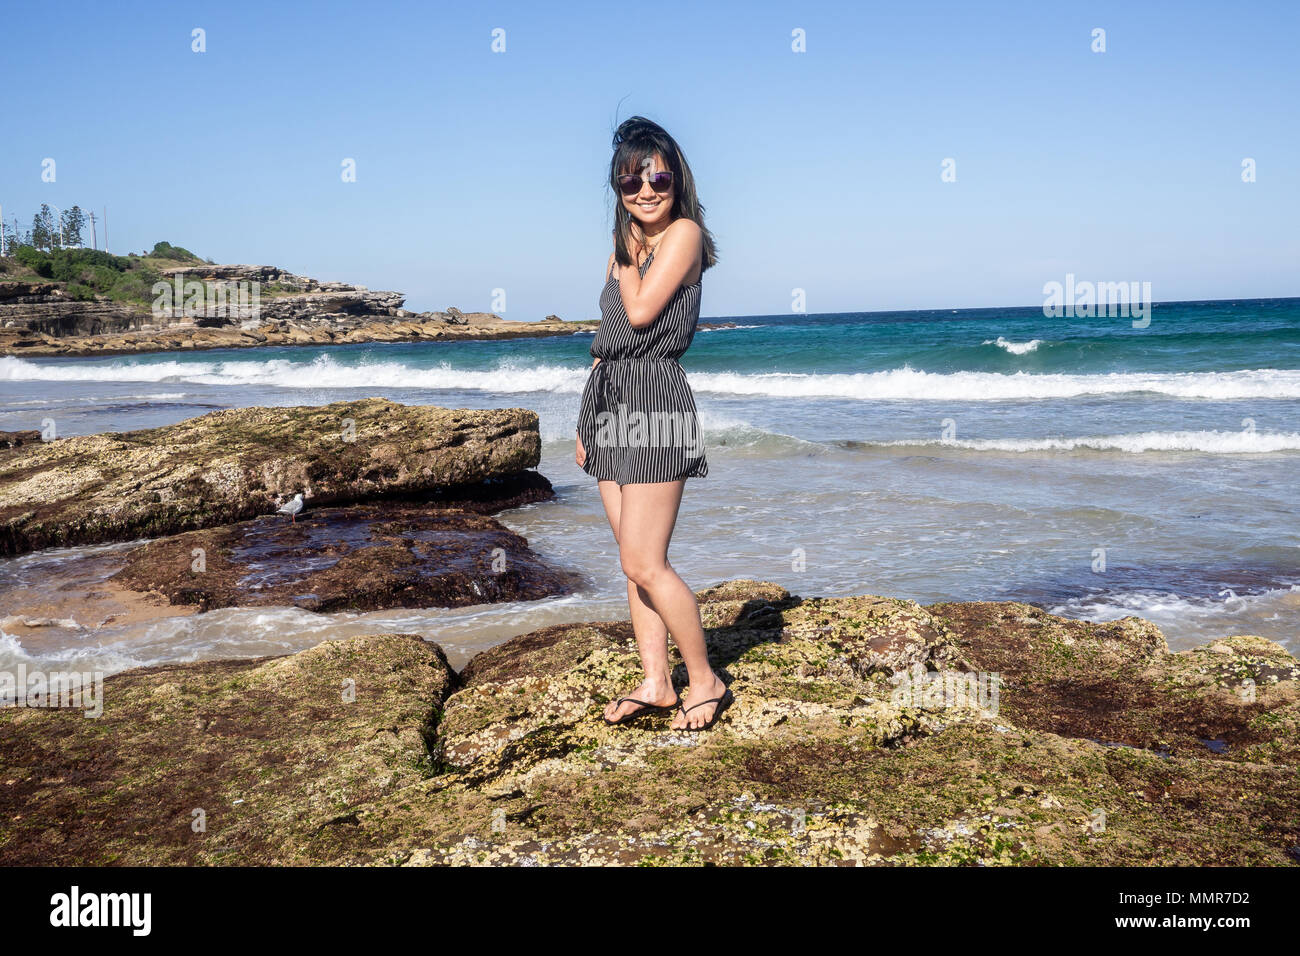 Young woman with sunglasses standing on the rocky shore of Maroubra beach, Sydney, Australia. Stock Photo